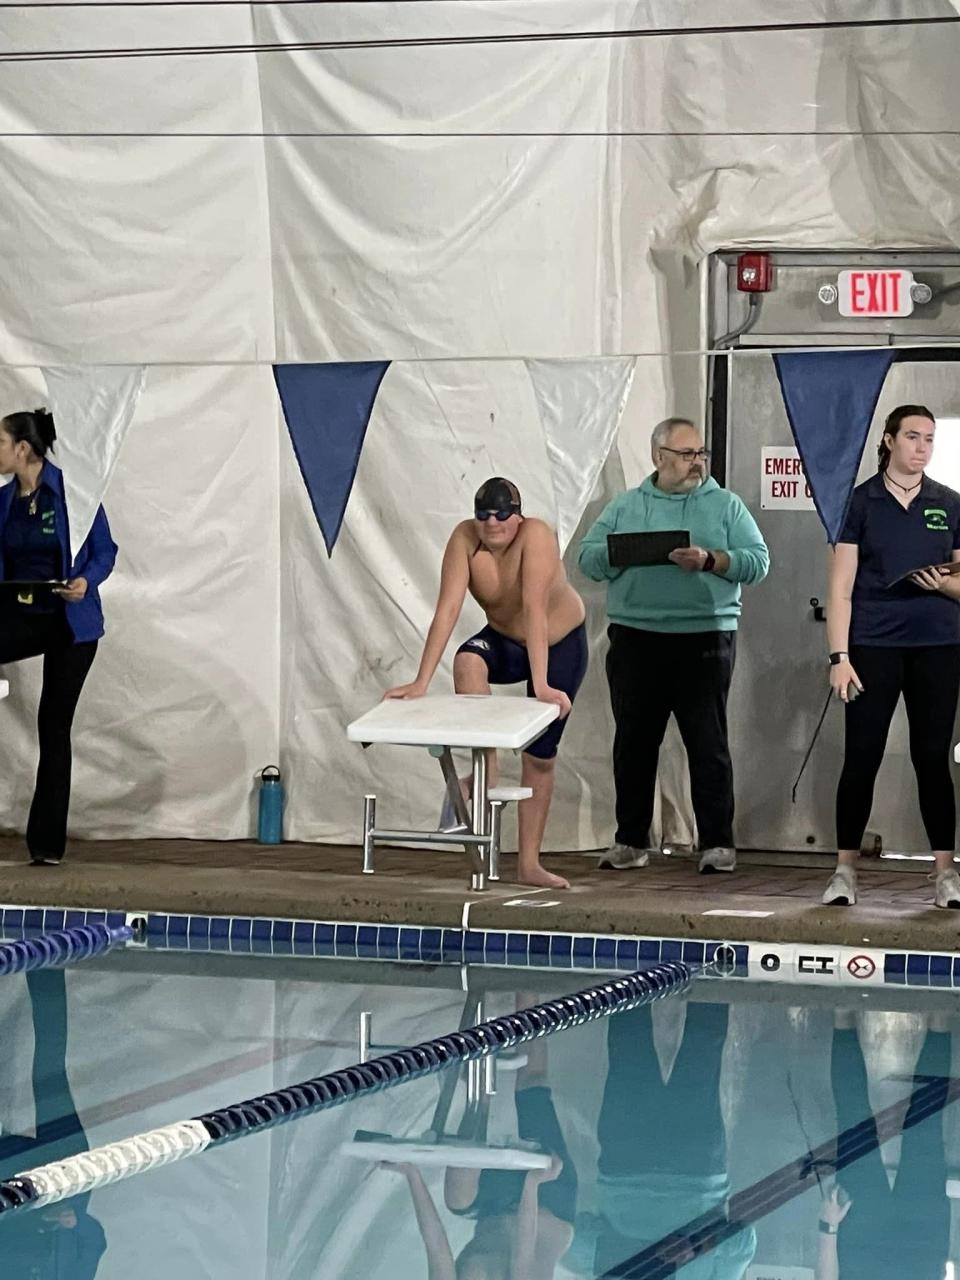 Tommy Marcketta, diagnosed with autism spectrum disorder at age 7, was a member of the Hillsborough High School swim team last winter.